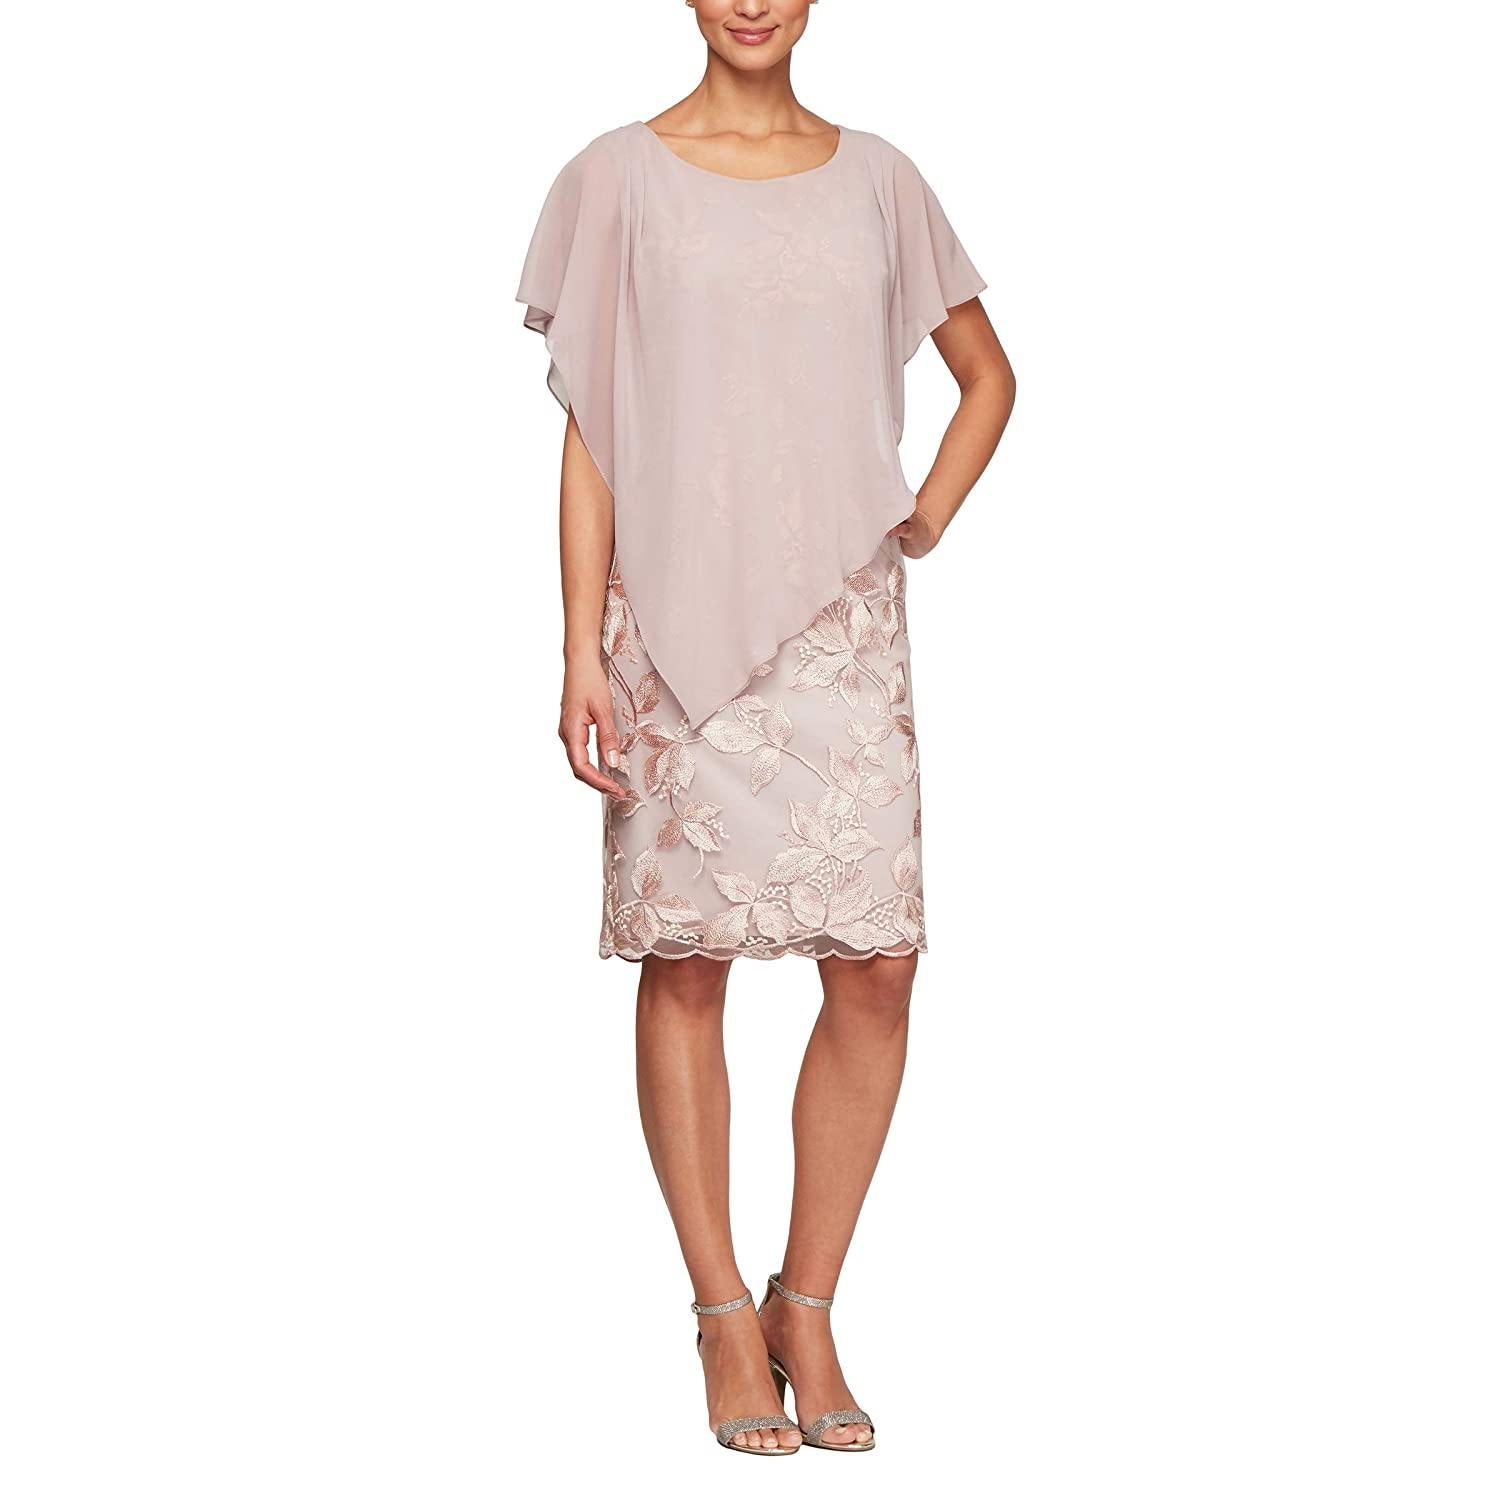 Alex Evenings Short Mother of the Bride Dress - The Dress Outlet